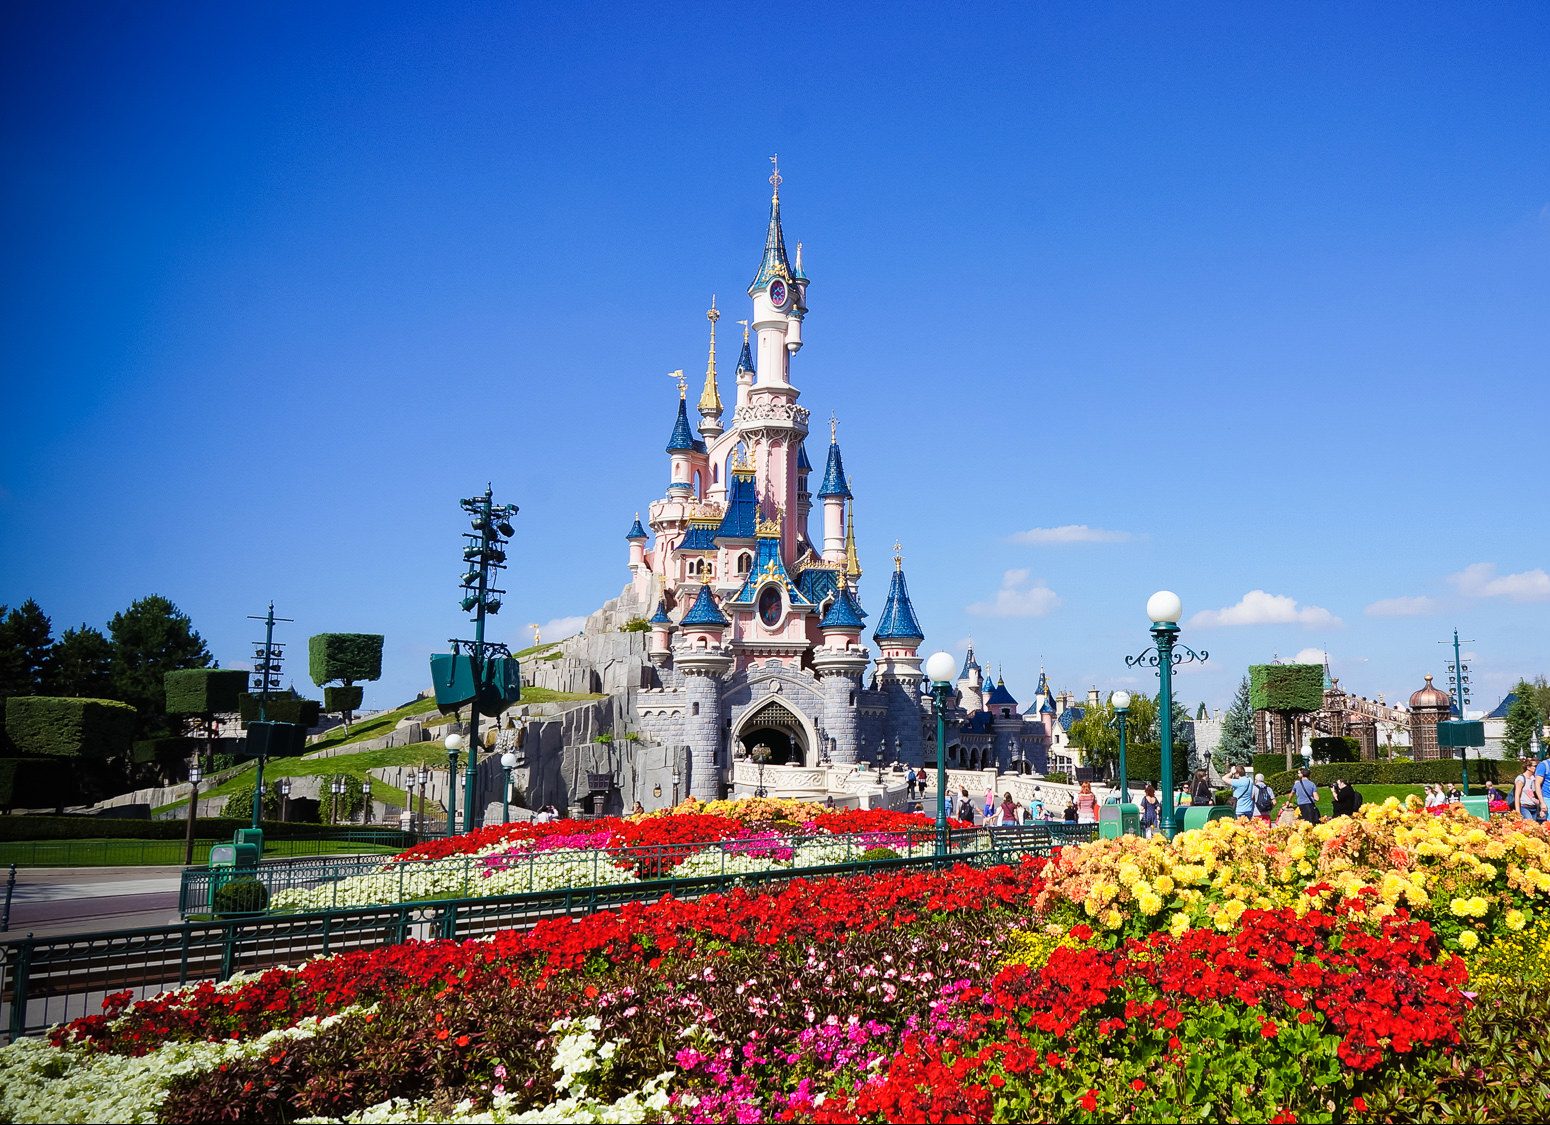 We’ll Give You an 🌮 International Food to Try Based on the ✈️ Places You Would Rather Visit Disneyland Paris